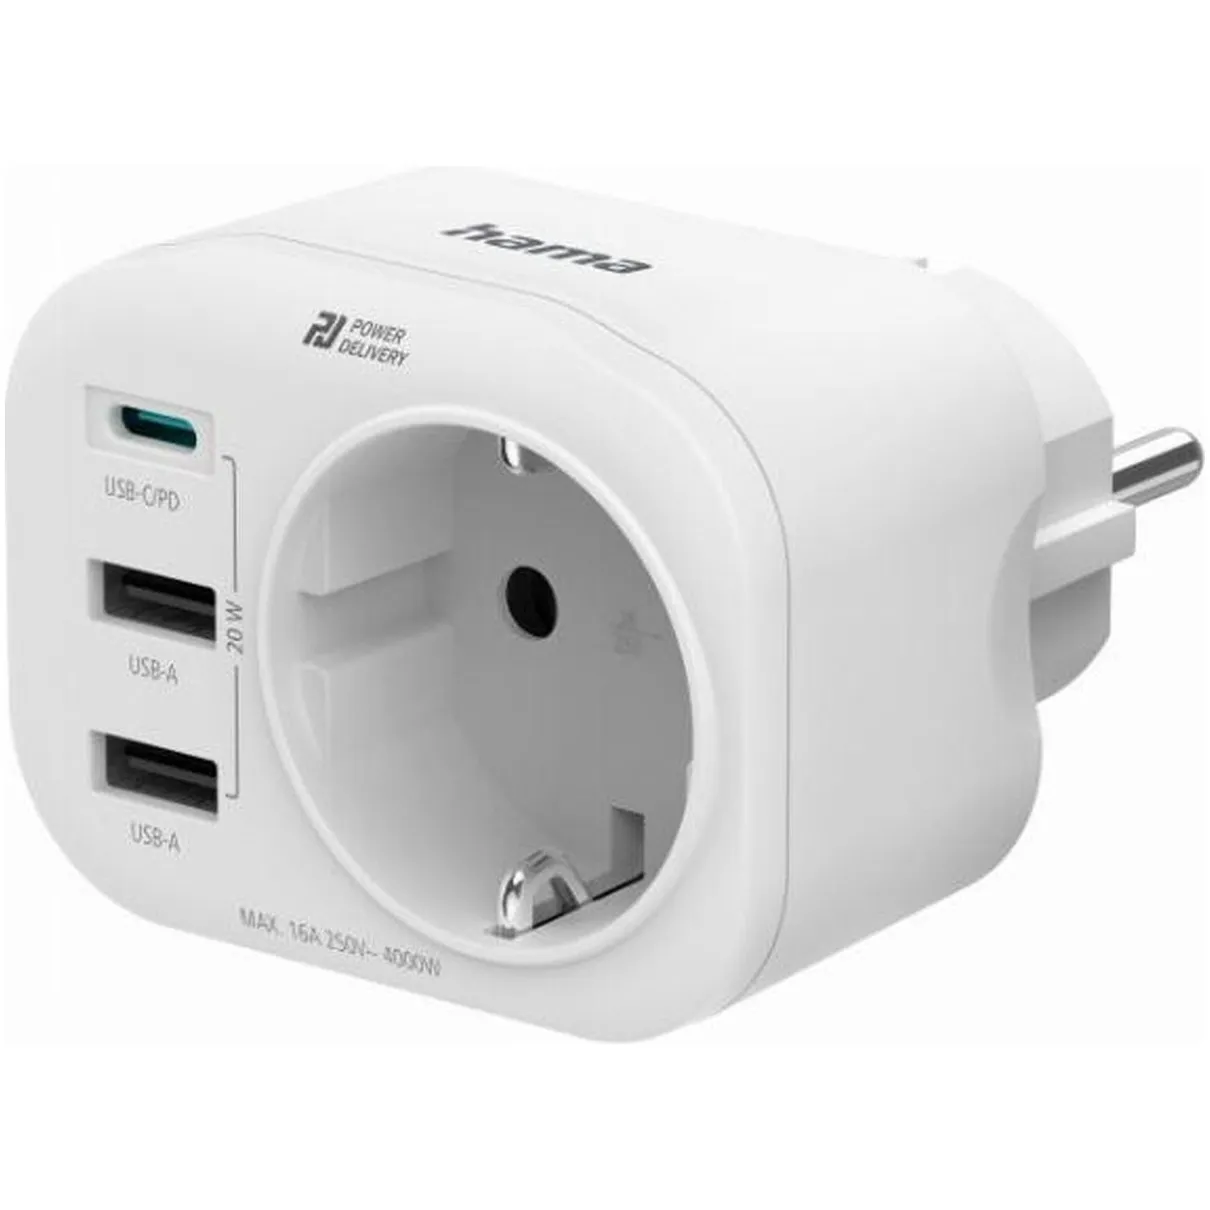 Hama 4-Way Multi-Adapter for Socket  1 USB-C PD  2 USB-A  1 Earthed Contact  20W Wit